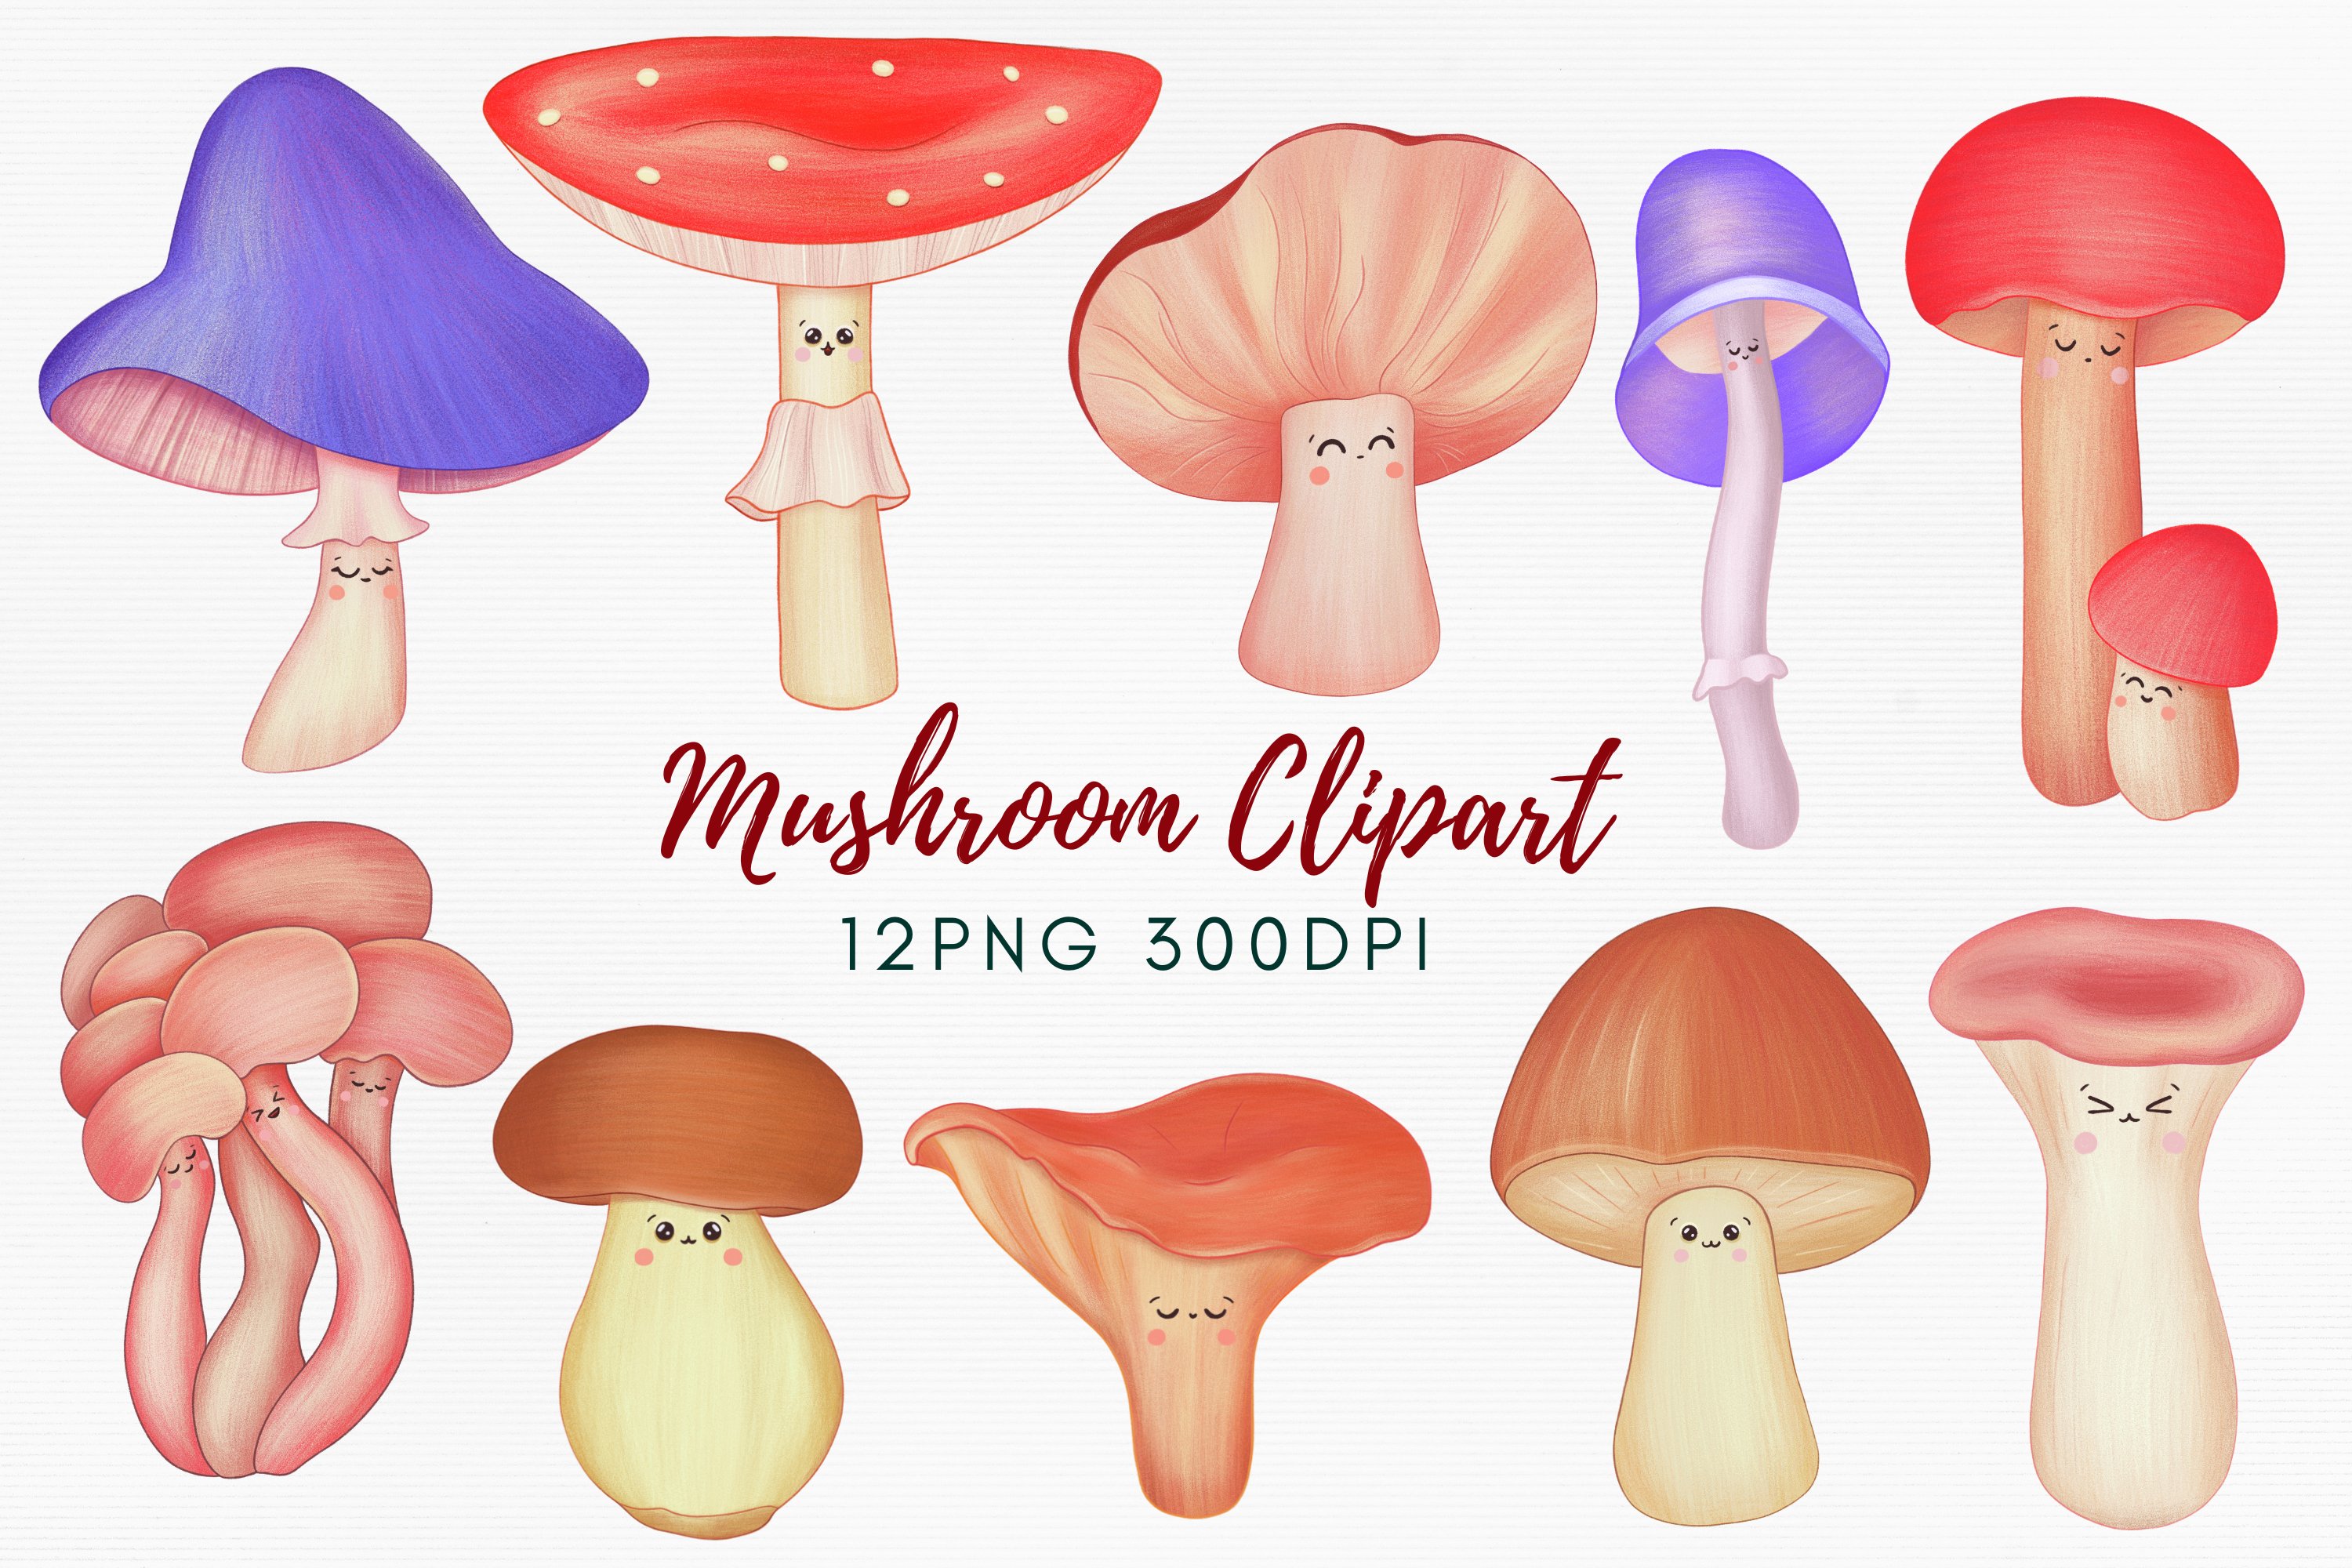 Red letetring "Mushroom Clipart" and different illustrations on a gray background.